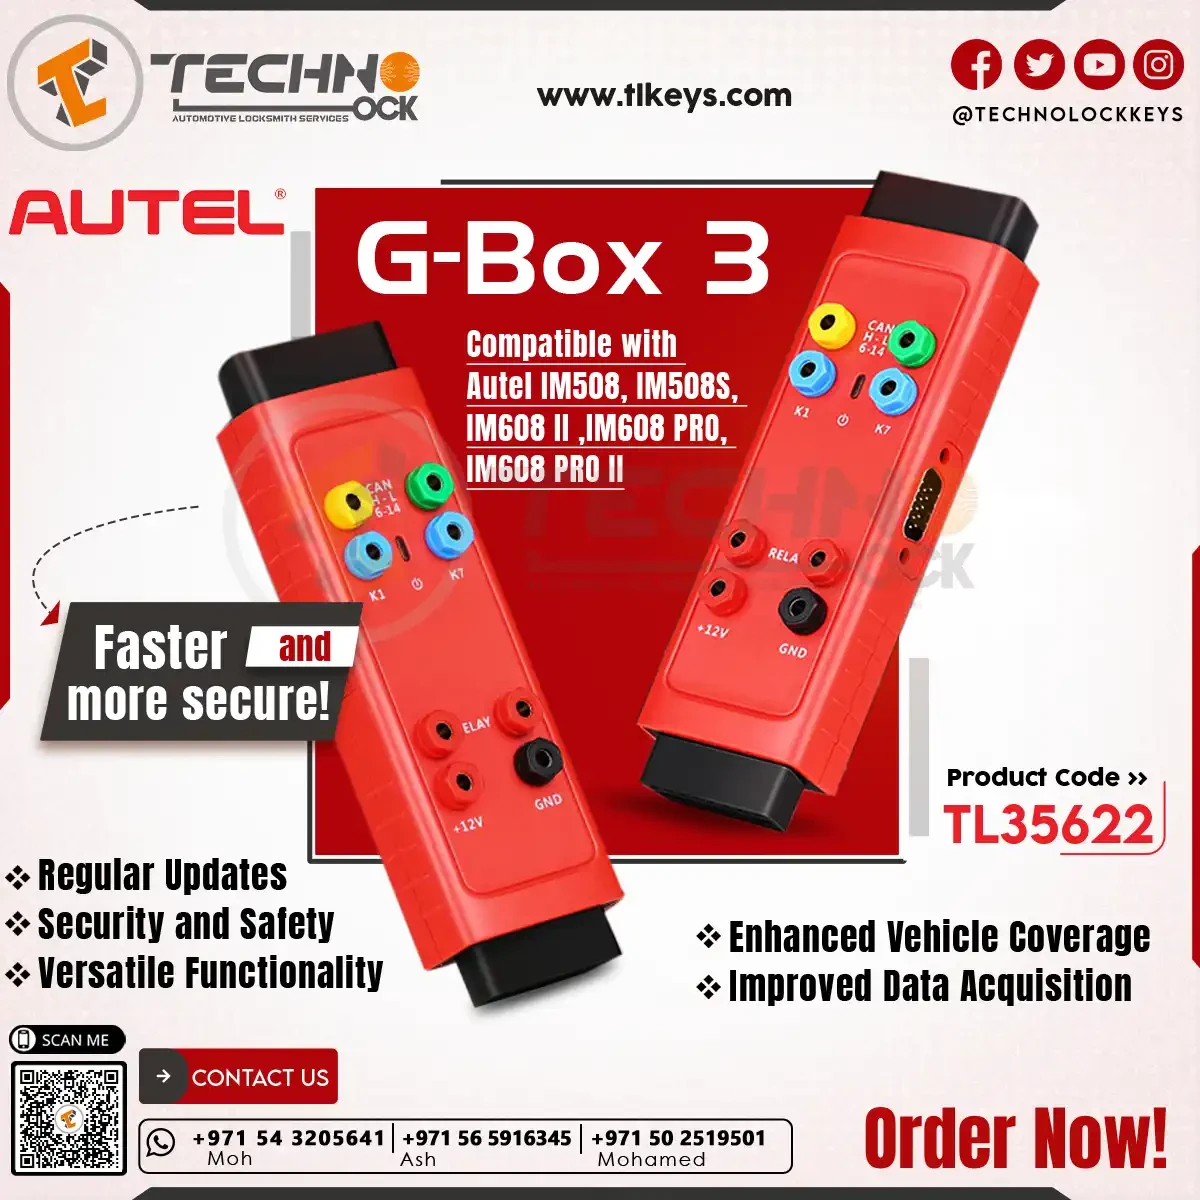  Autel G-Box 3 for Mercedes-Benz, BMW, and VW